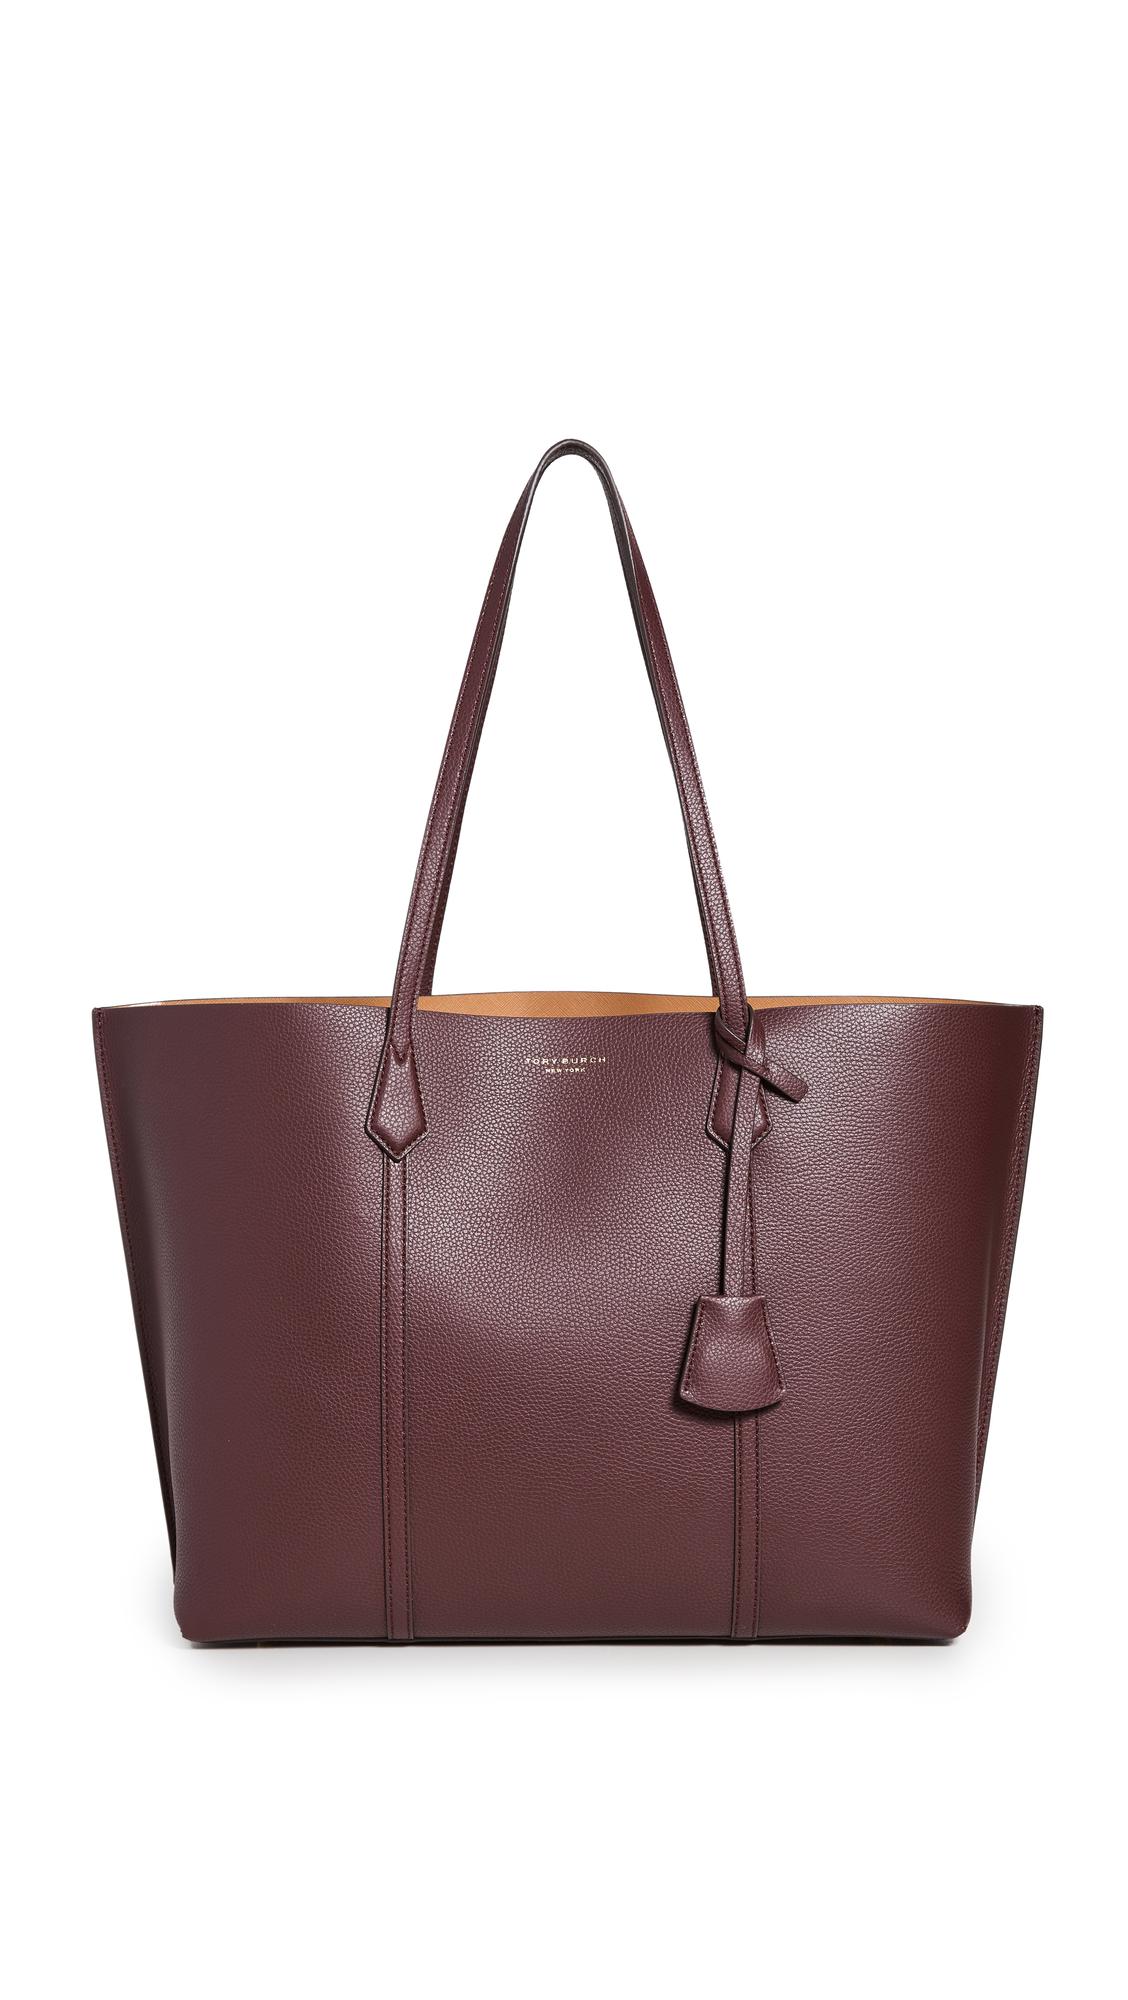 Perry Triple-Compartment Tote Bag: Women's Handbags, Tote Bags